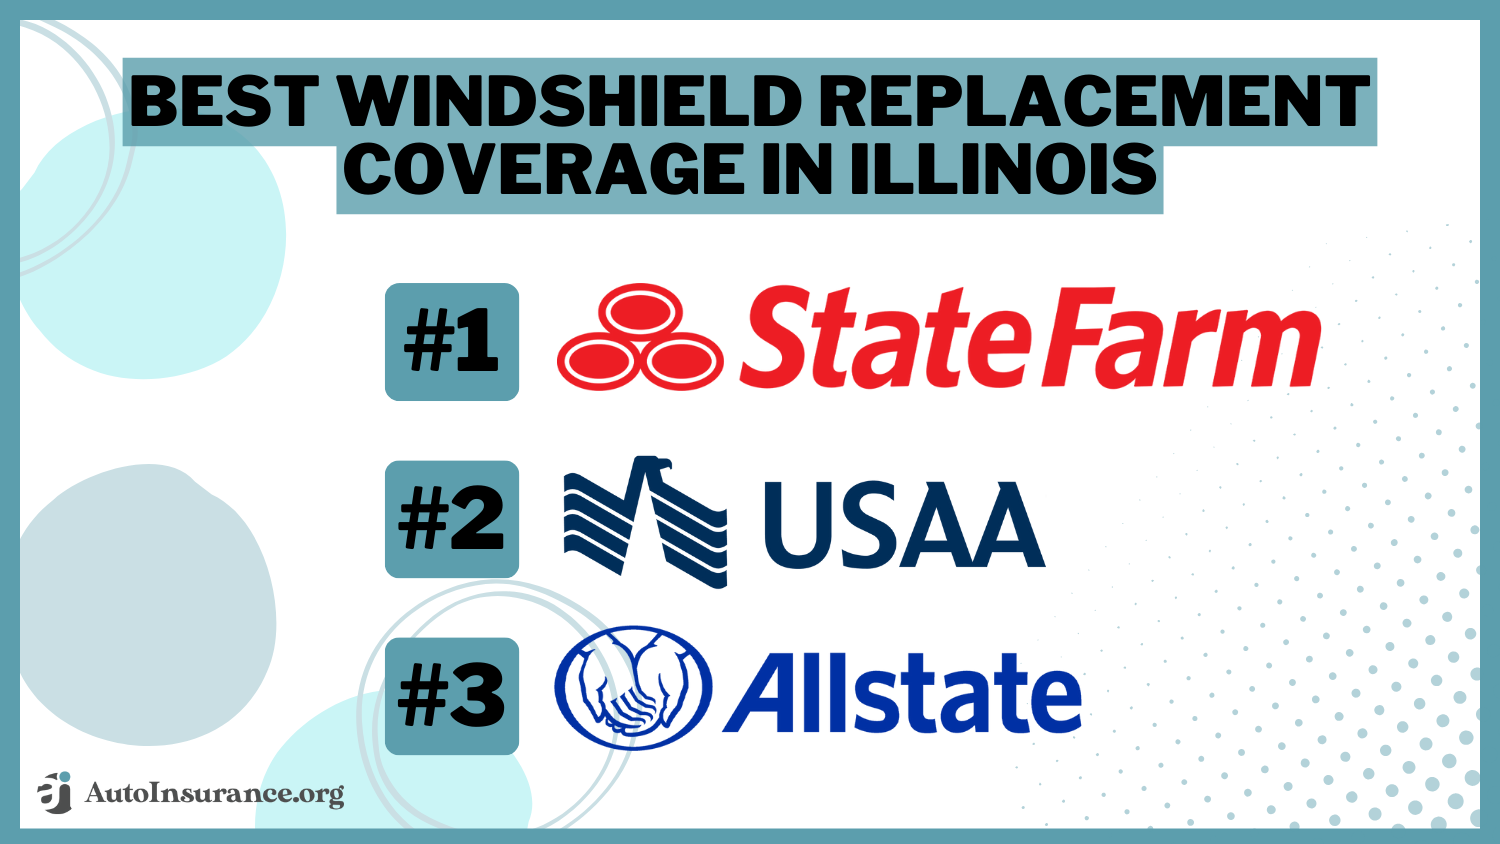 Best Windshield Replacement Coverage in Illinois: State Farm, USAA, and Allstate